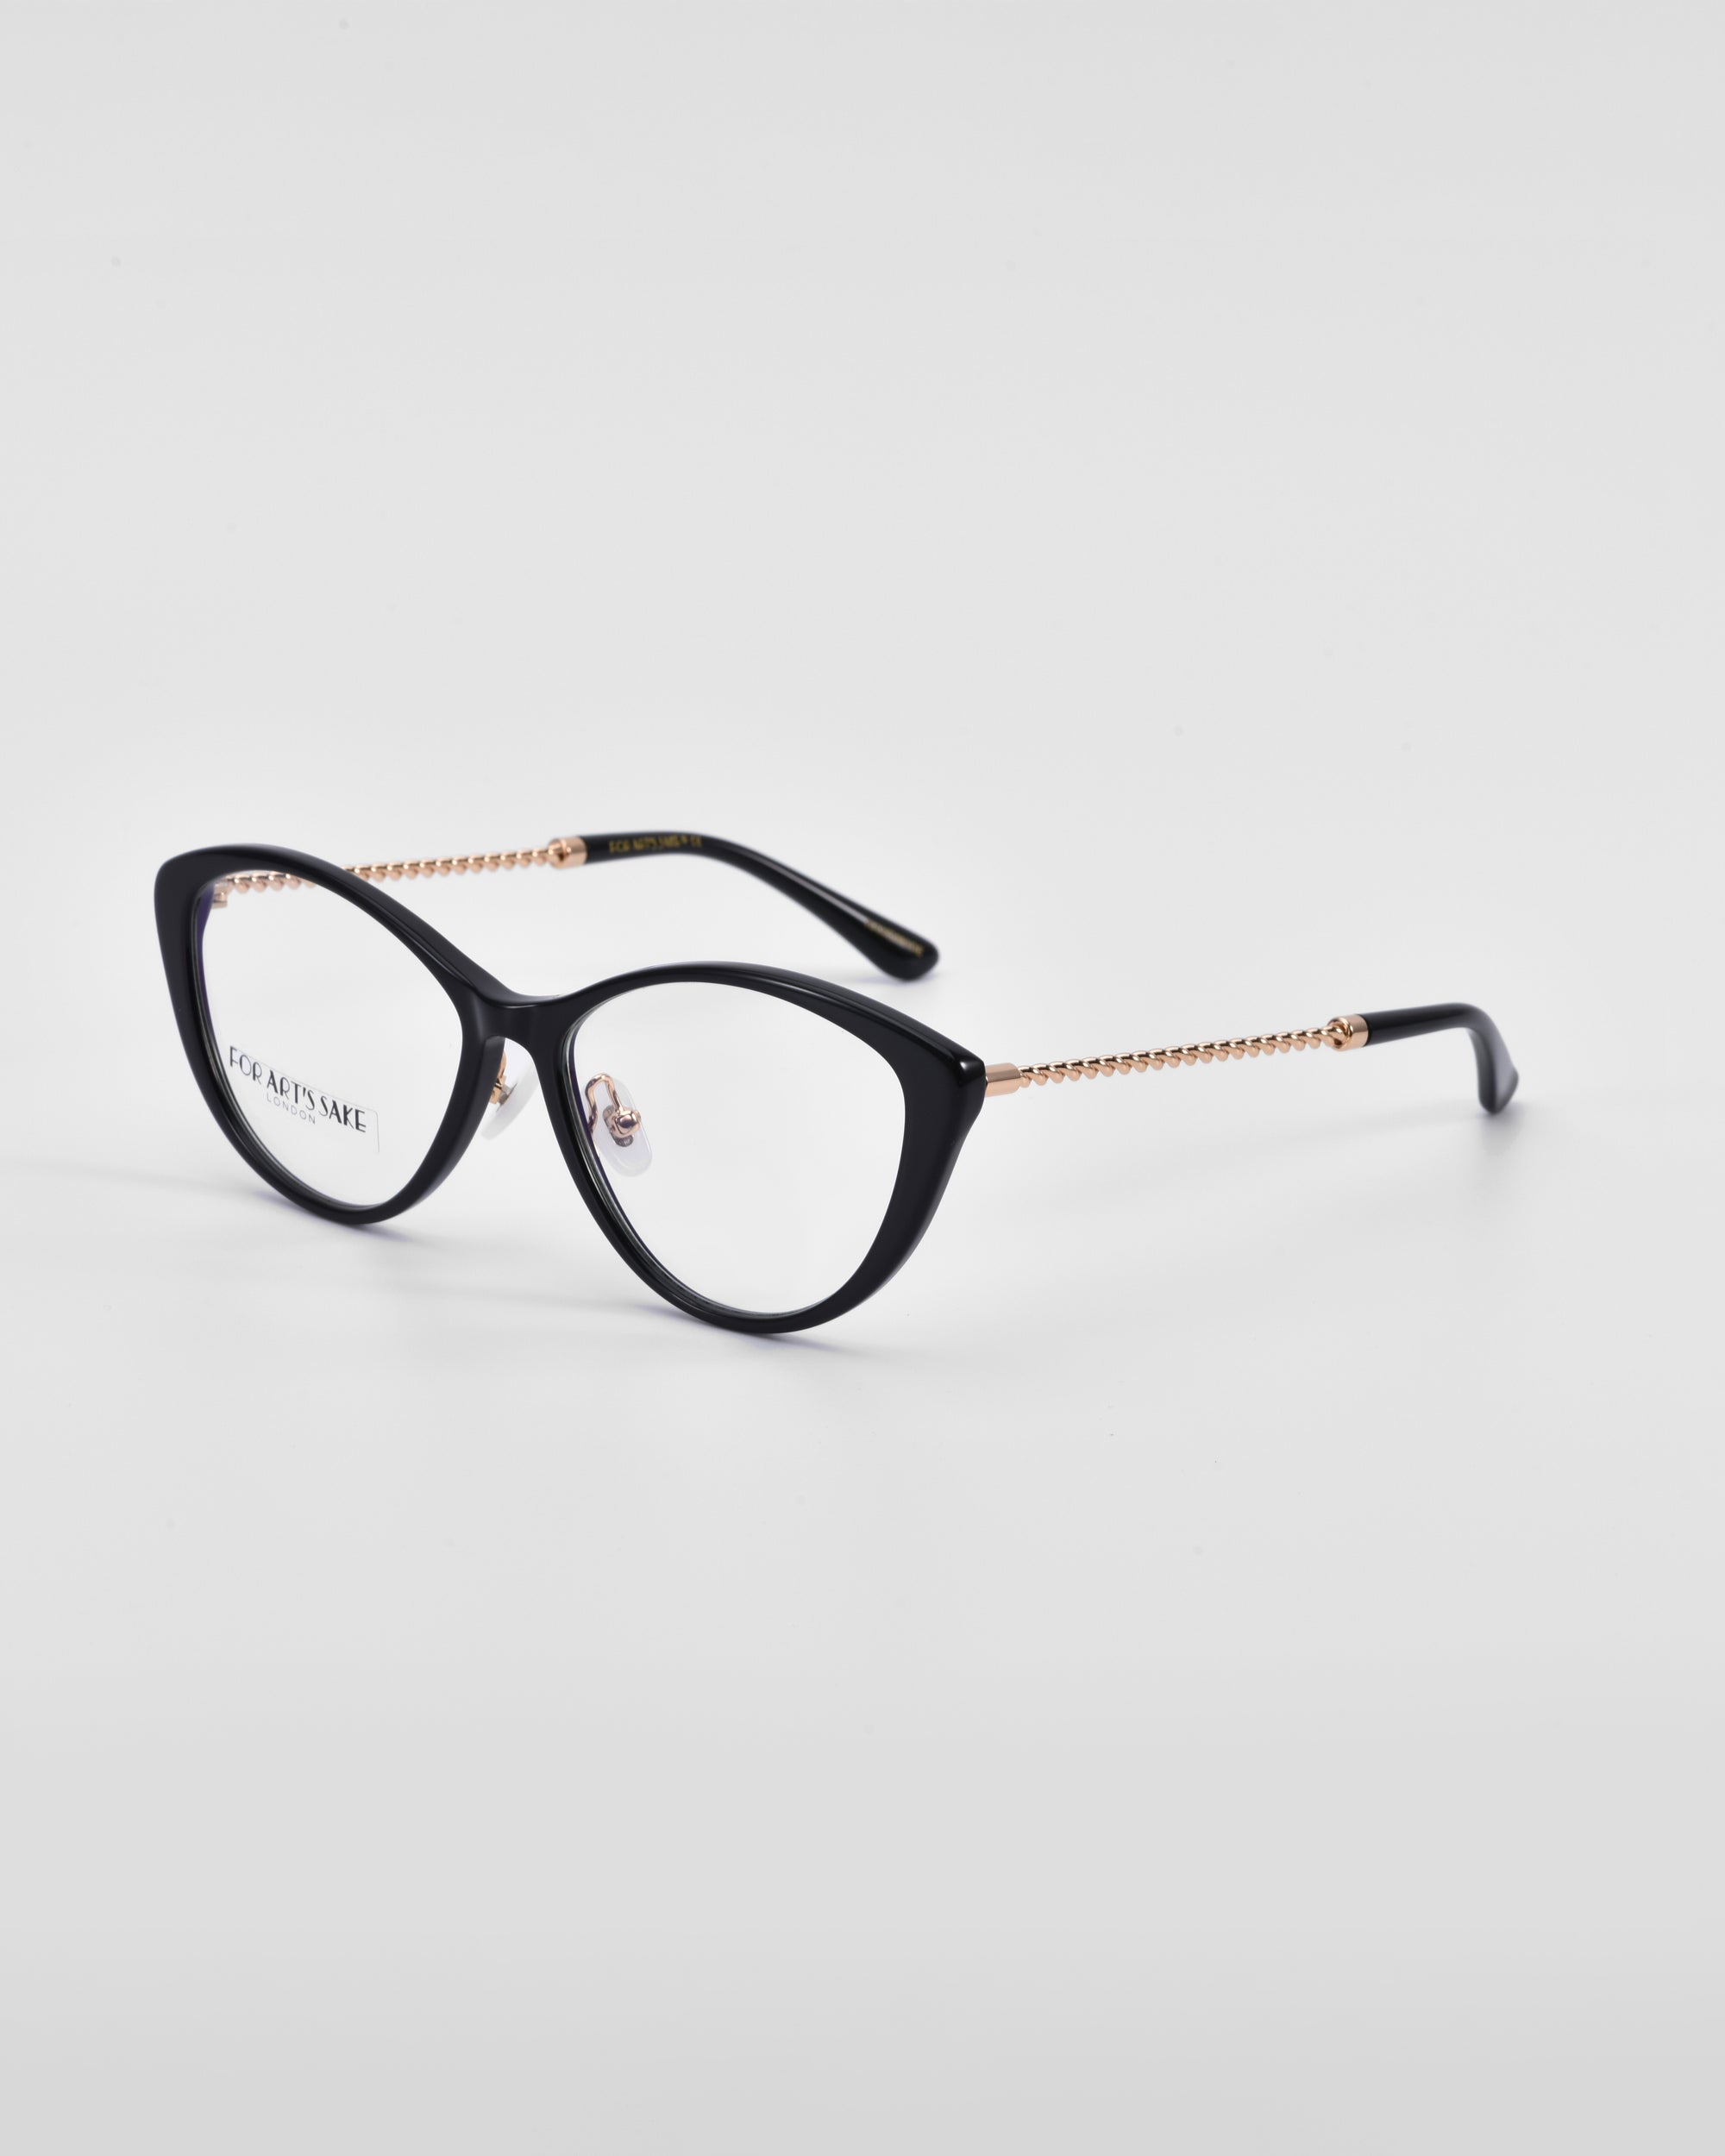 A pair of For Art&#39;s Sake® Perla II black cat-eye glasses with gold temple arms is placed on a white surface. The glasses have clear lenses, and the temple arms feature a beaded pattern and 18-karat gold plating, adding a touch of luxury to their optical design.